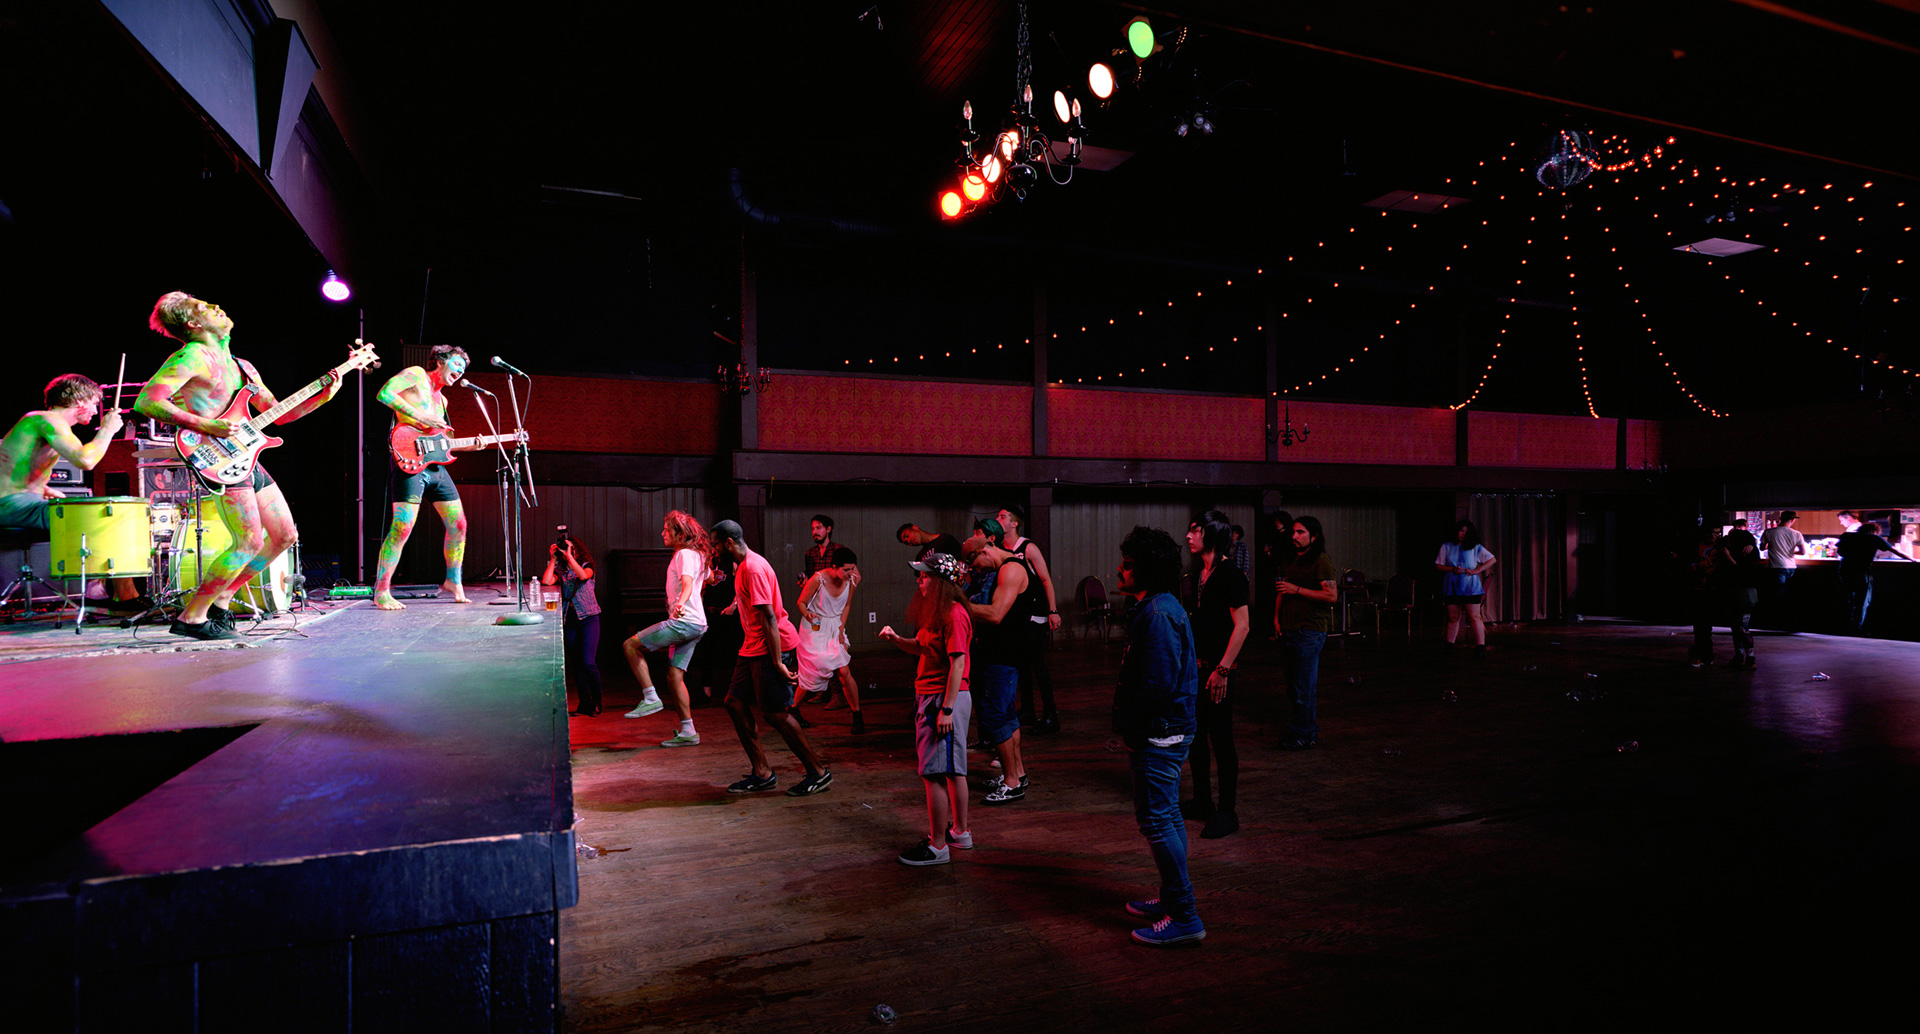 Jeff Wall - Band and crowd, 2011, color photograph